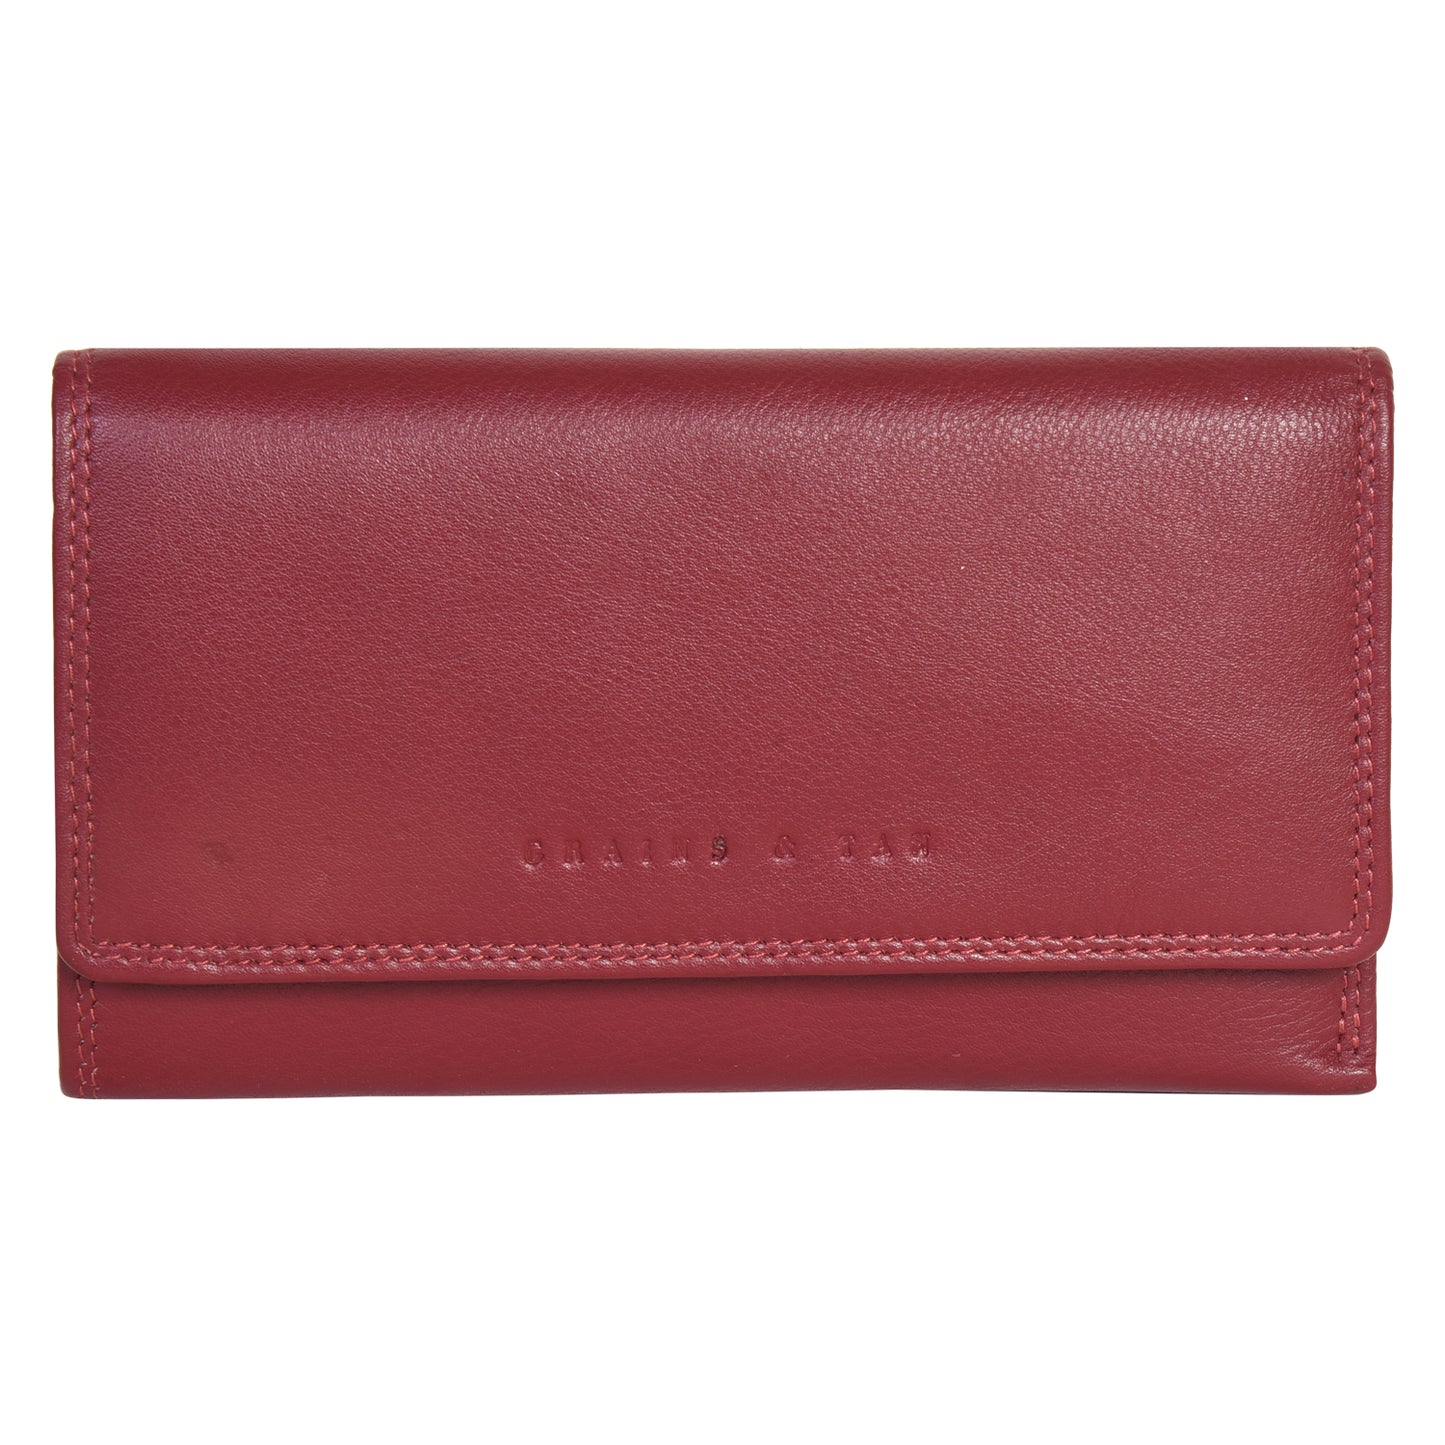 GT-TP10: G&T Full-grain Leather Long Trifold Purse, Clutch (RFID Protected)